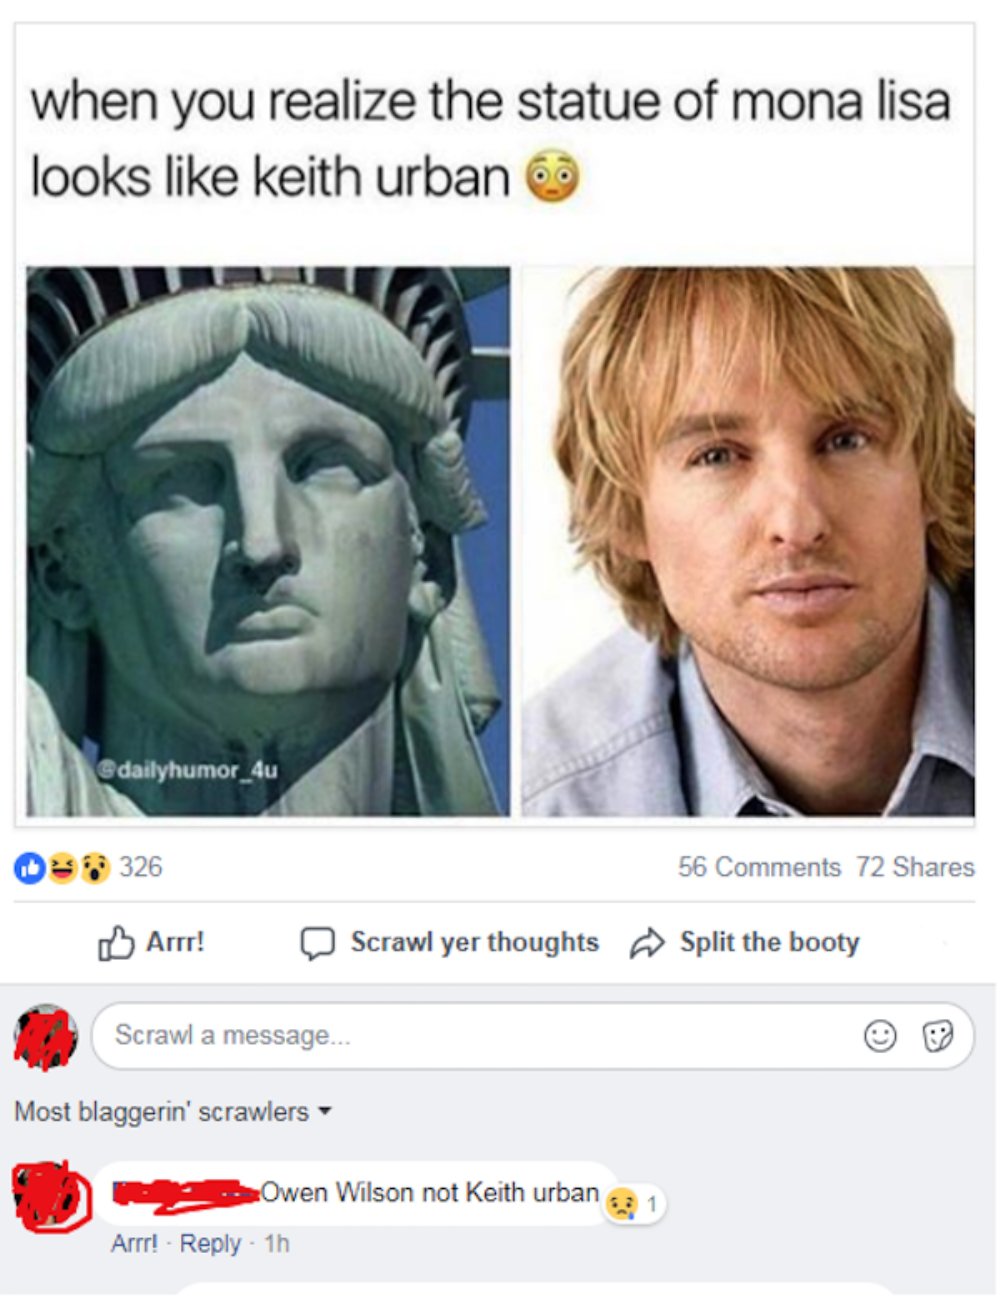 missed - owen wilson statue of liberty - when you realize the statue of mona lisa looks keith urban dailyhumor_4u 04326 56 72 Arrr! Scrawl yer thoughts Split the booty Scrawl a message... Most blaggerin' scrawlers Owen Wilson not Keith urban Arrr! 1h